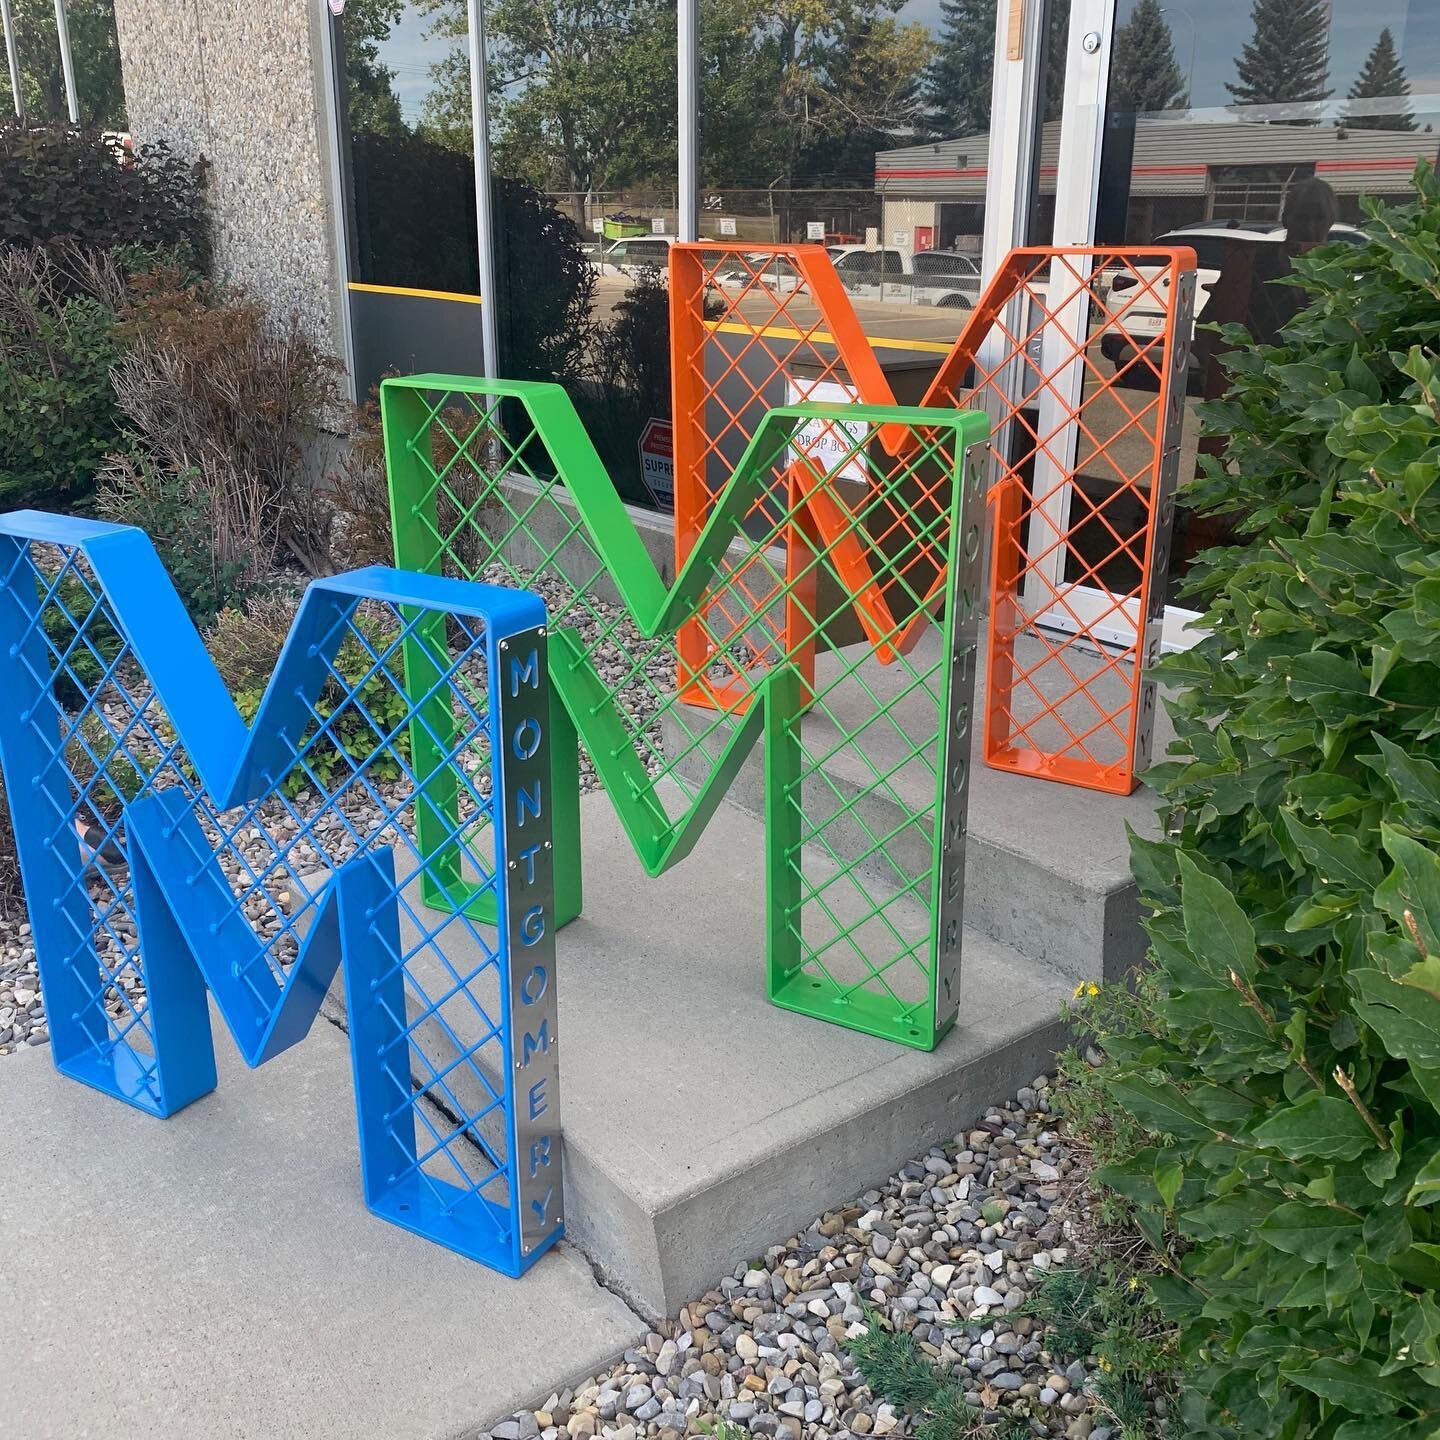 New racks Friday - thanks to the wonderful folks @montgomeryonthebow and @trillionindustries for the great partnership to bring these beauties to life. Look for them on the streets of this rad community soon. #betterbikeracks #yyc #montgomery #bike #